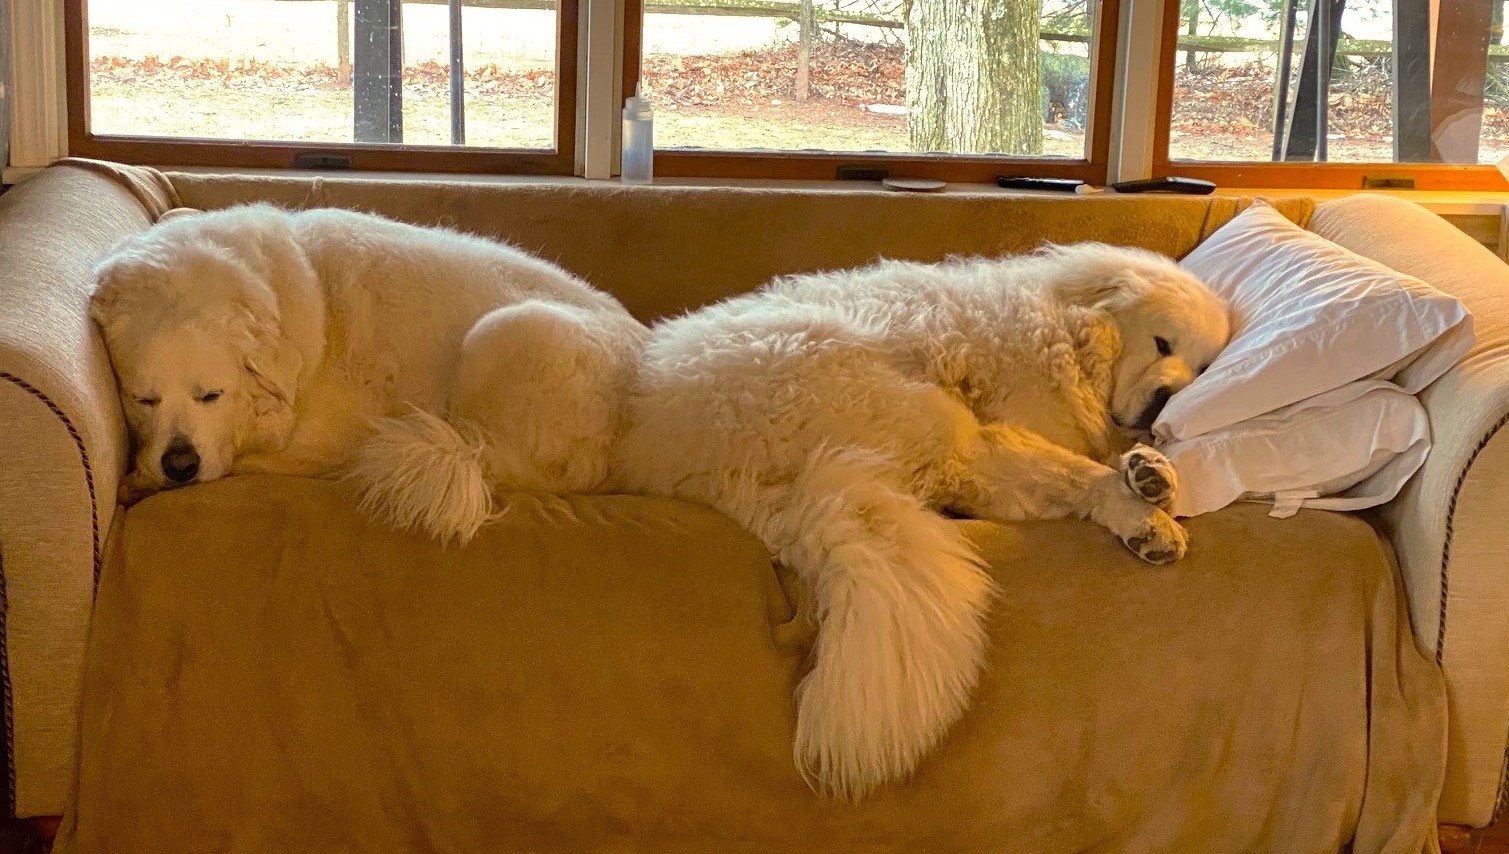 Two Great Pyrenees dogs asleep on a couch